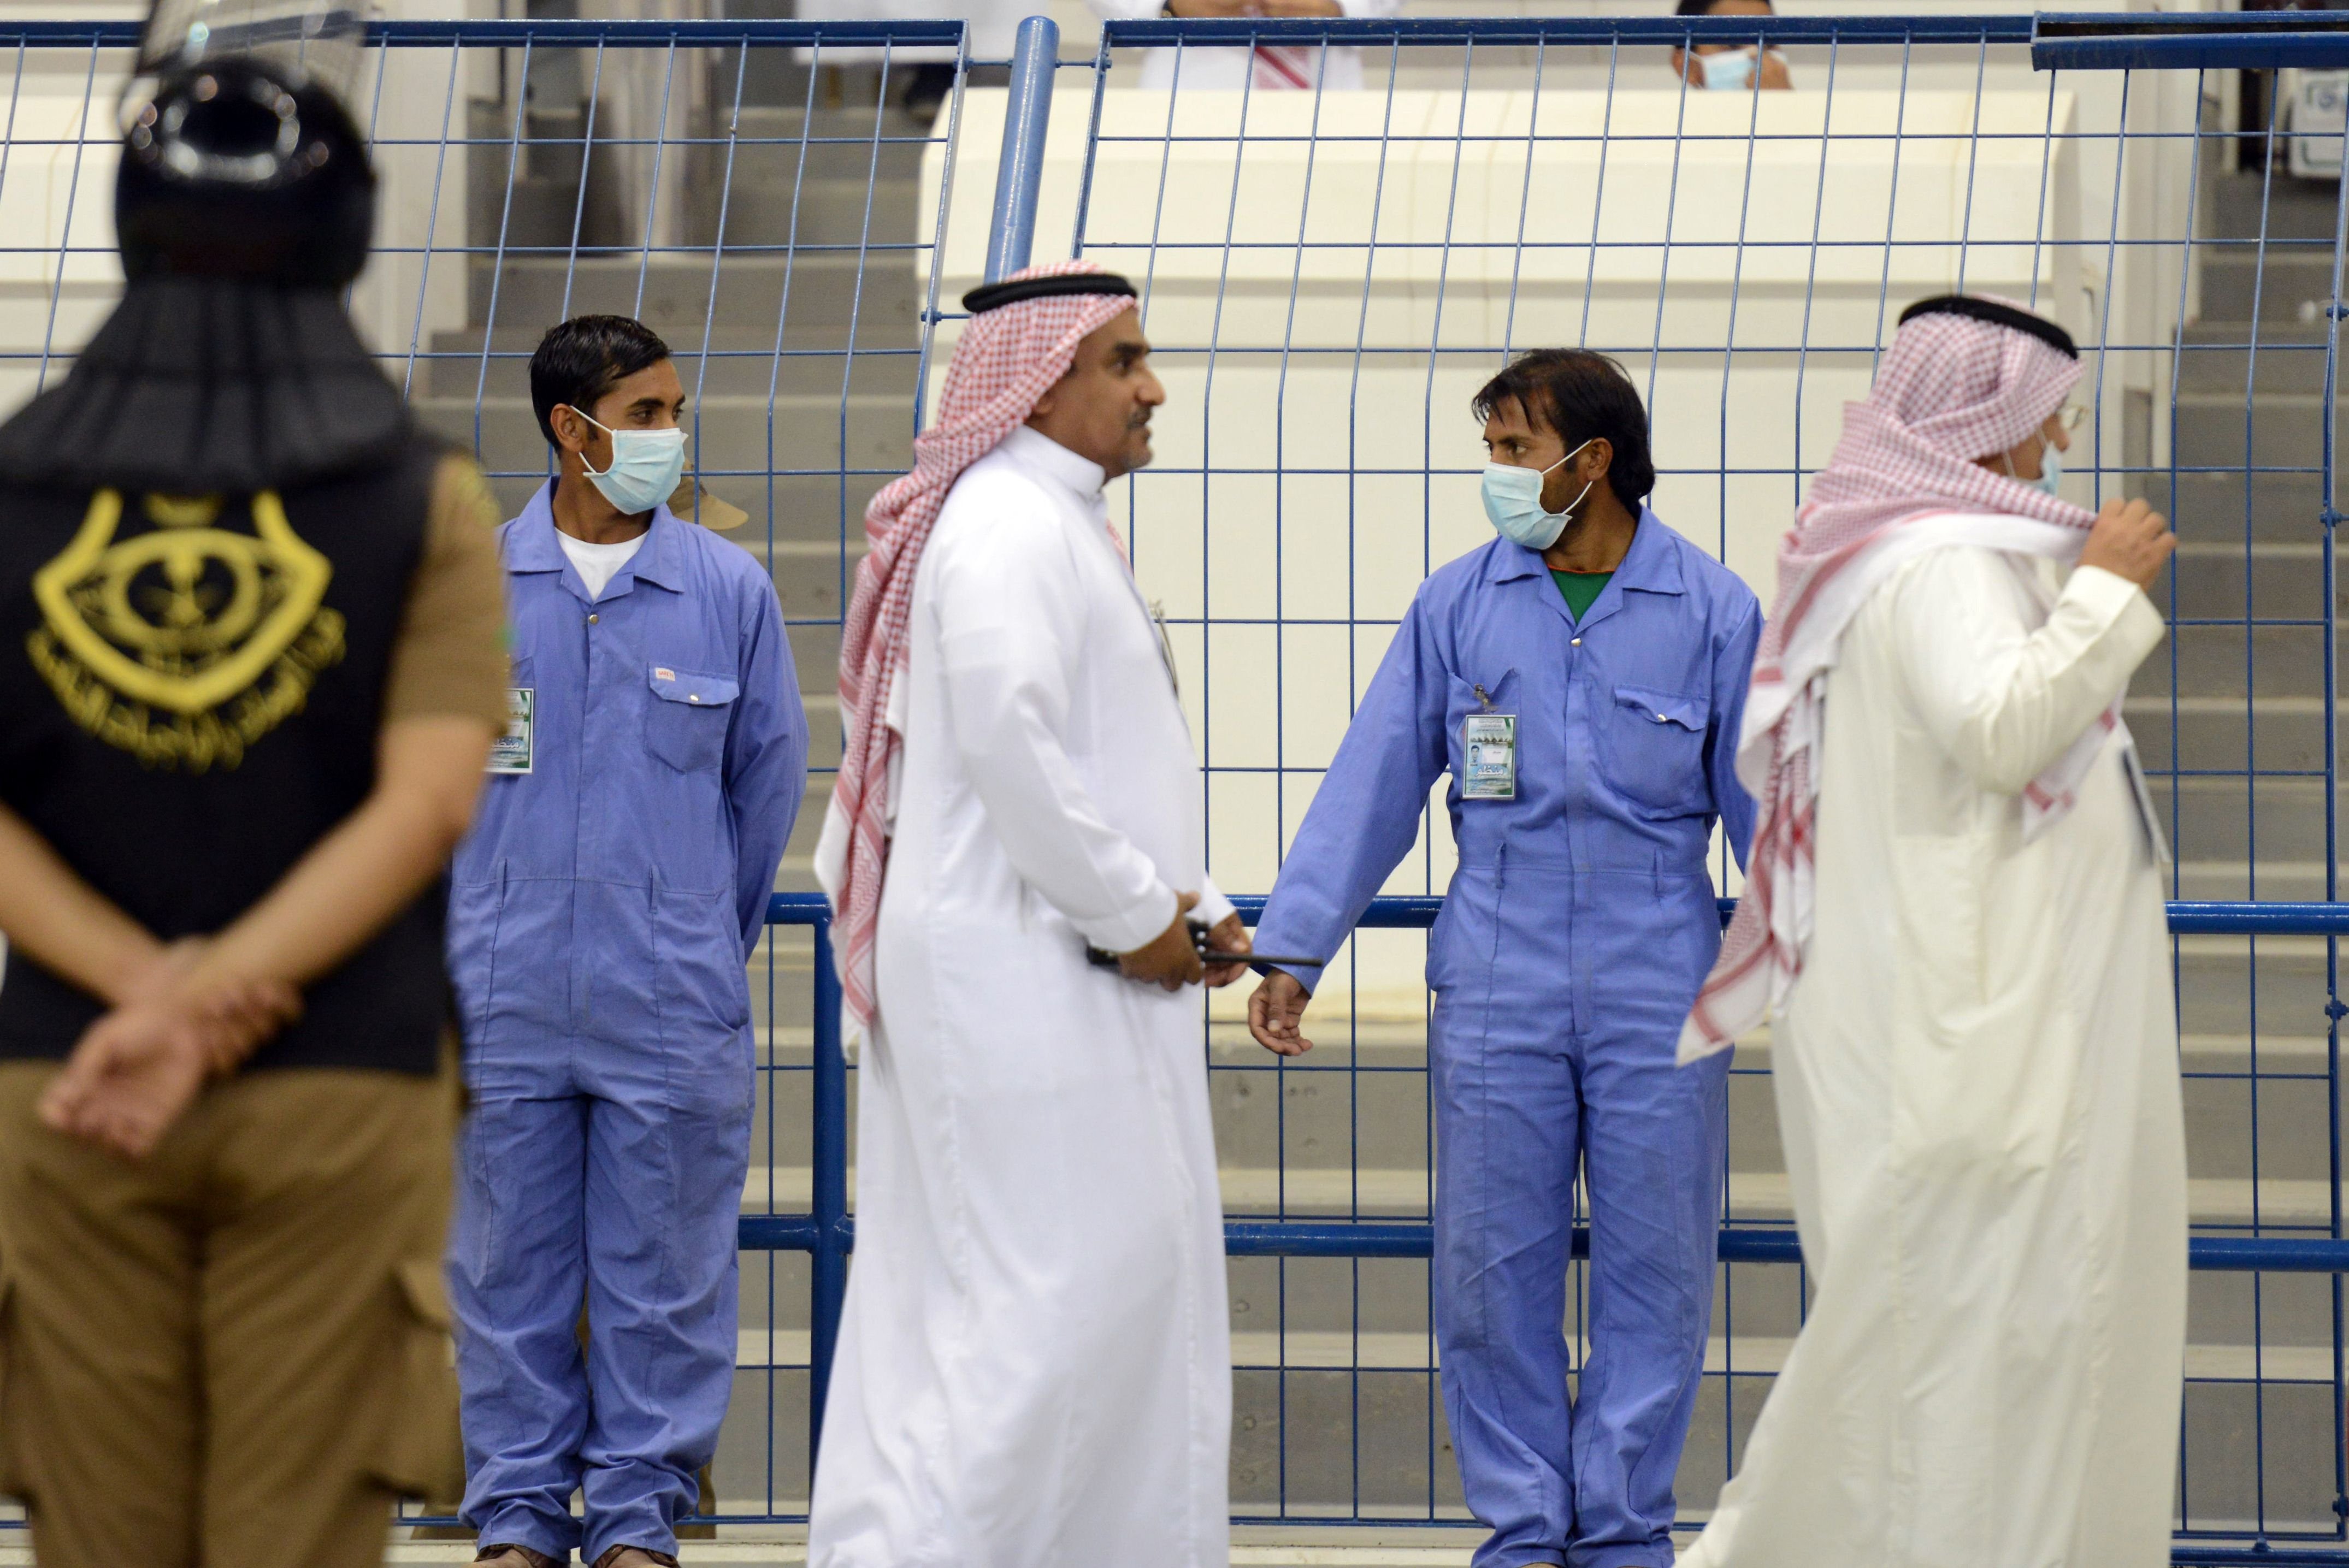 Asian workers wear mouth and nose masks while on duty during a football match at the King Fahad stadium, on April 22, 2014 in Riyadh.